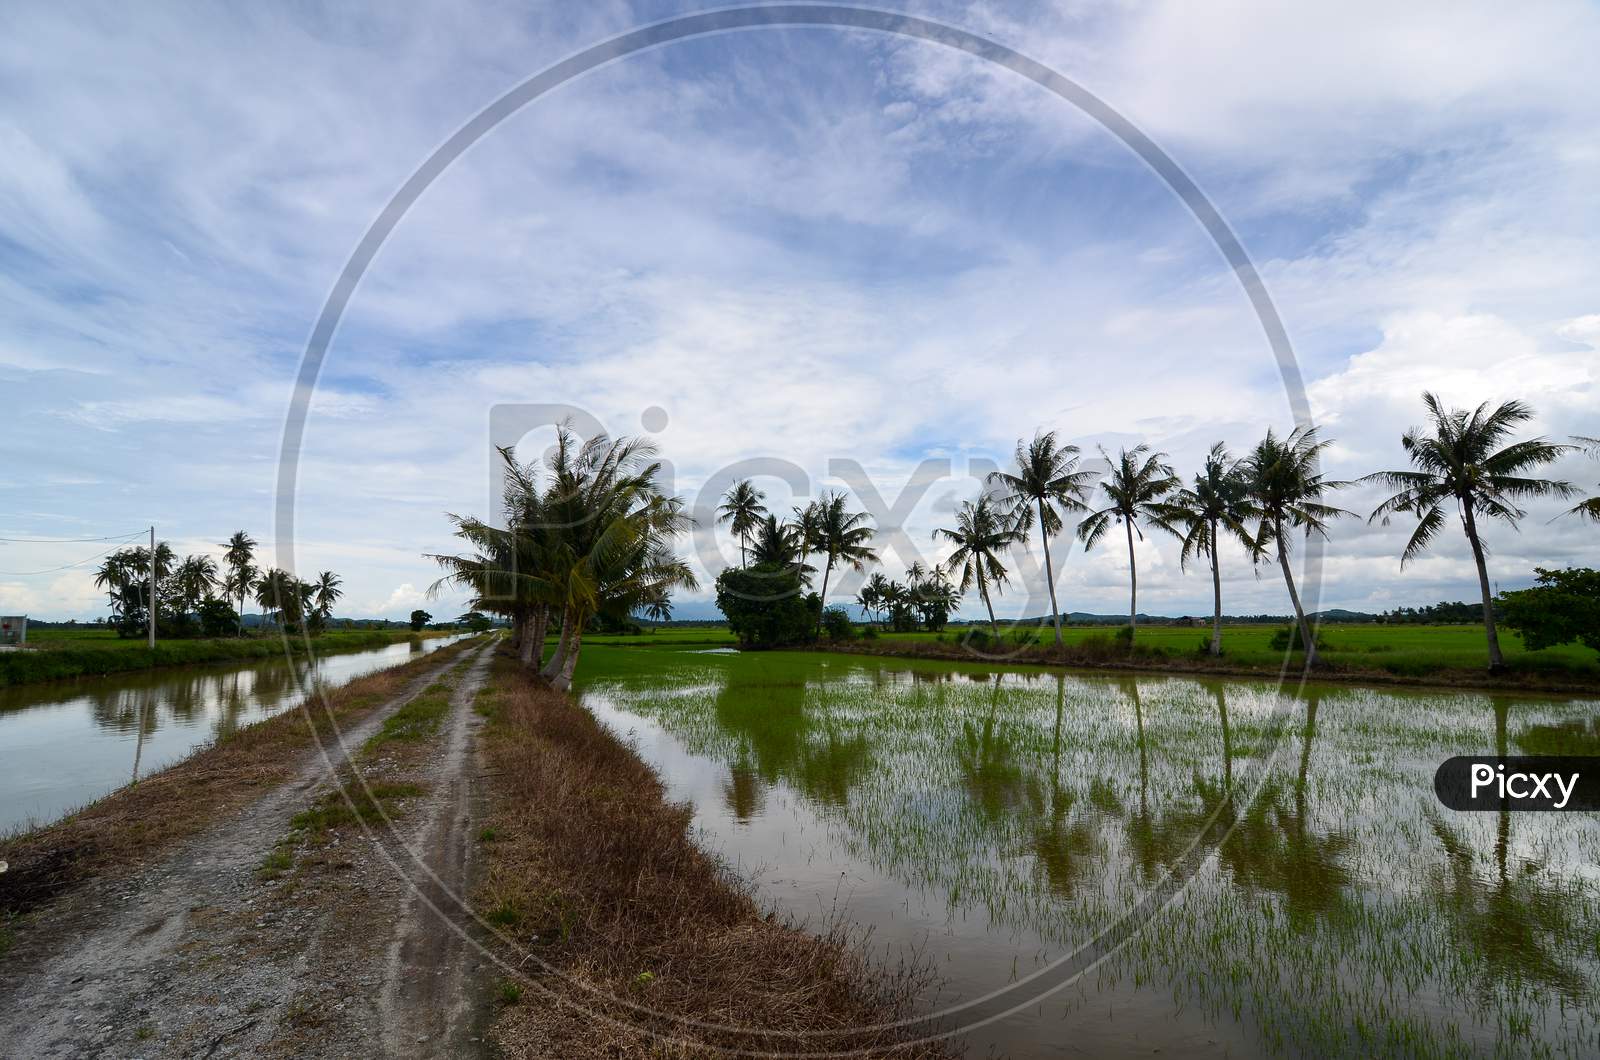 A Path In The Paddy Field During Water Season.